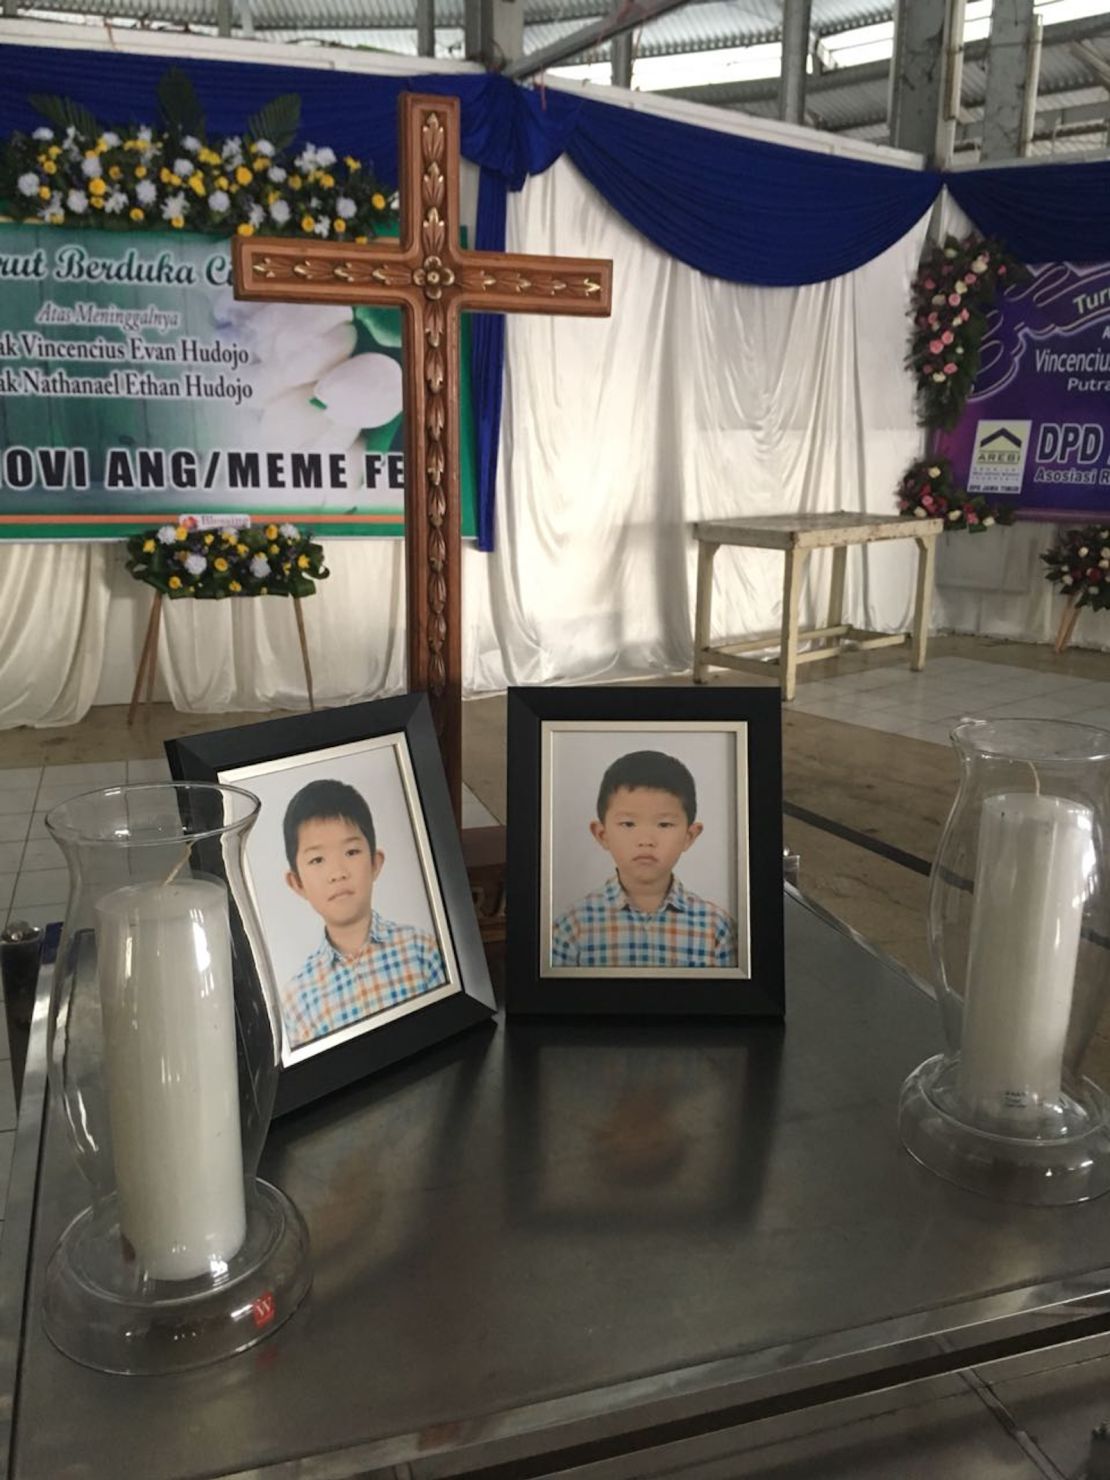 Photos of Vincensius Evan Hudojo and Nathanael Ethan Hudojo are displayed at a funeral home.